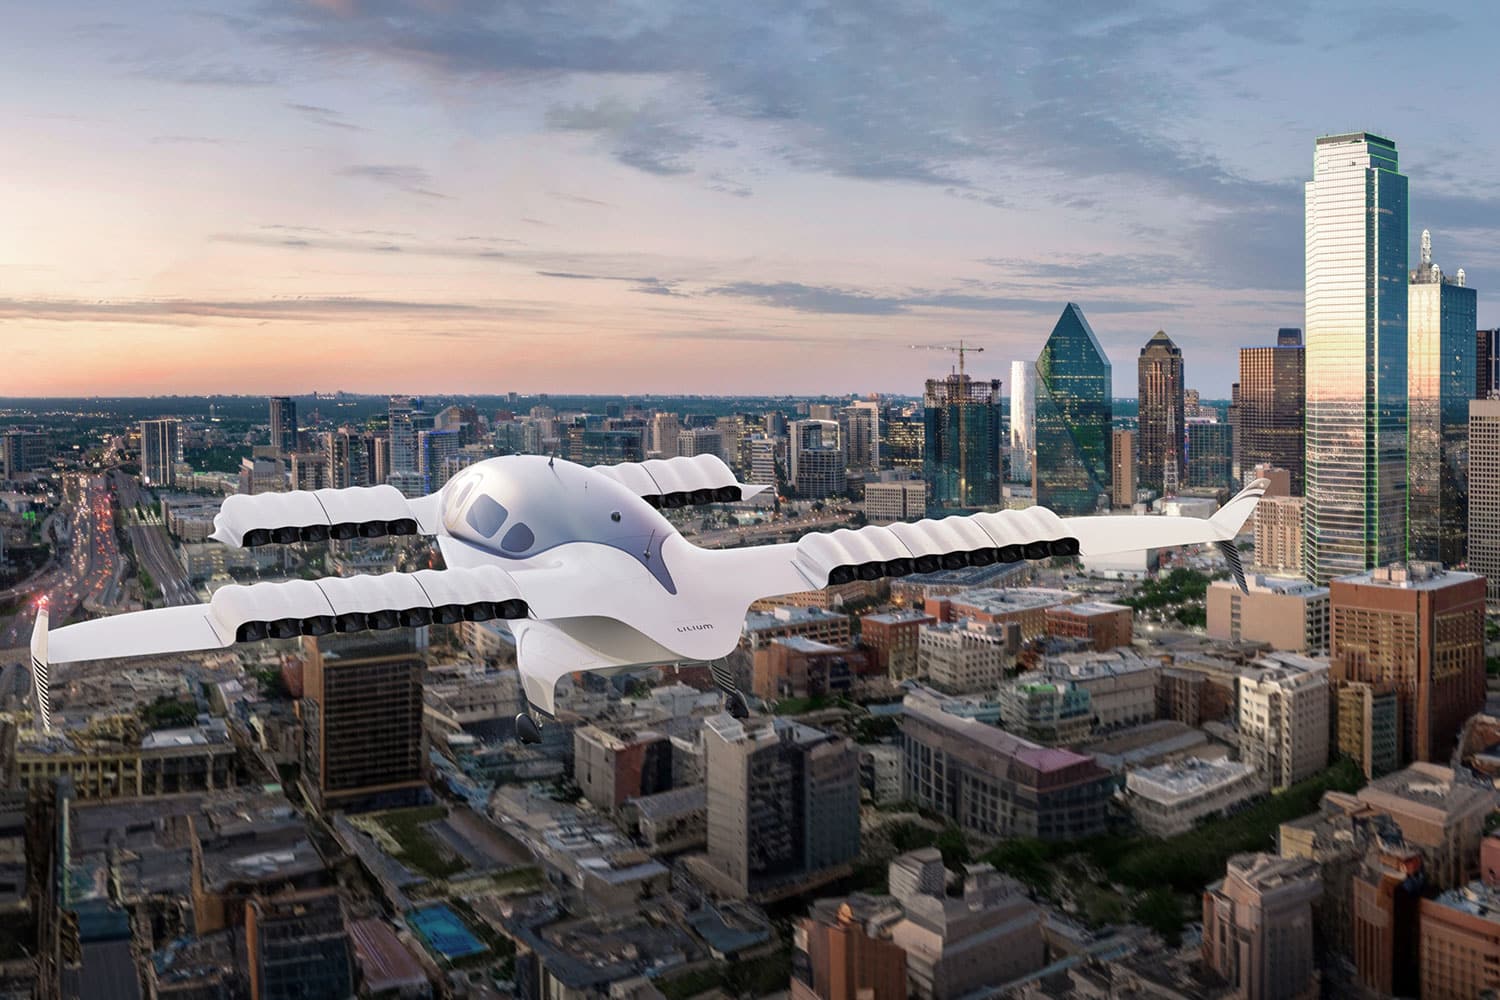 Lilium Jet becomes first eVTOL for private sale in the U.S.